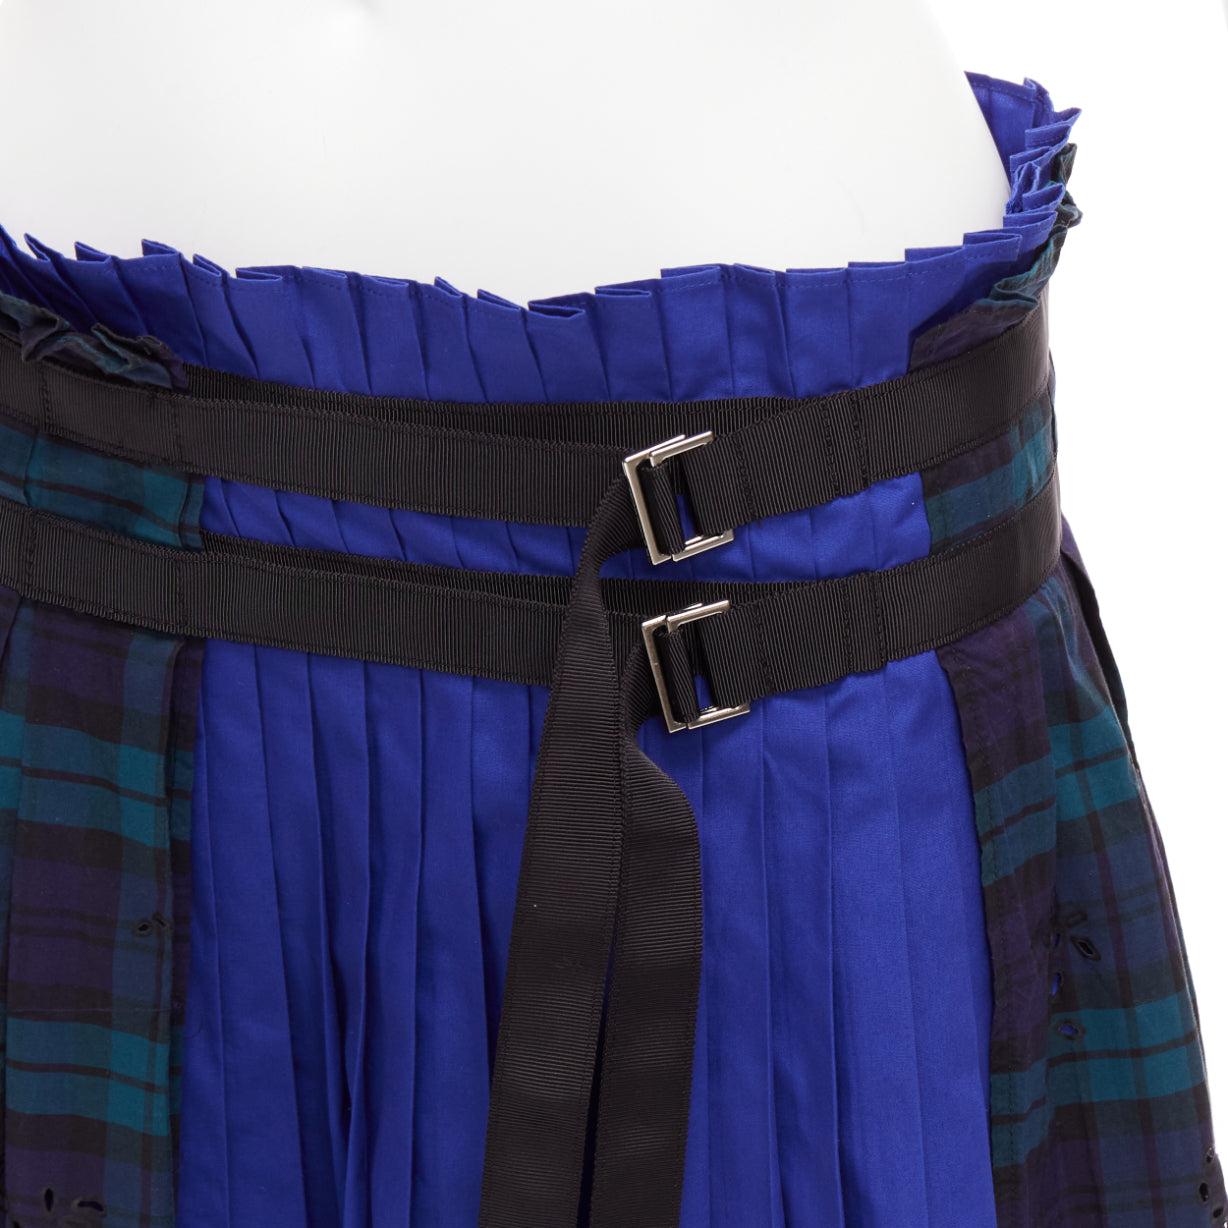 SACAI 2015 blue green plaid cotton eyelets lace asymmetric wrap skirt JP3 L
Reference: CNPG/A00053
Brand: Sacai
Designer: Chitose Abe
Collection: 2015
Material: Cotton
Color: Blue, Green
Pattern: Plaid
Closure: Belt
Lining: Blue Fabric
Extra